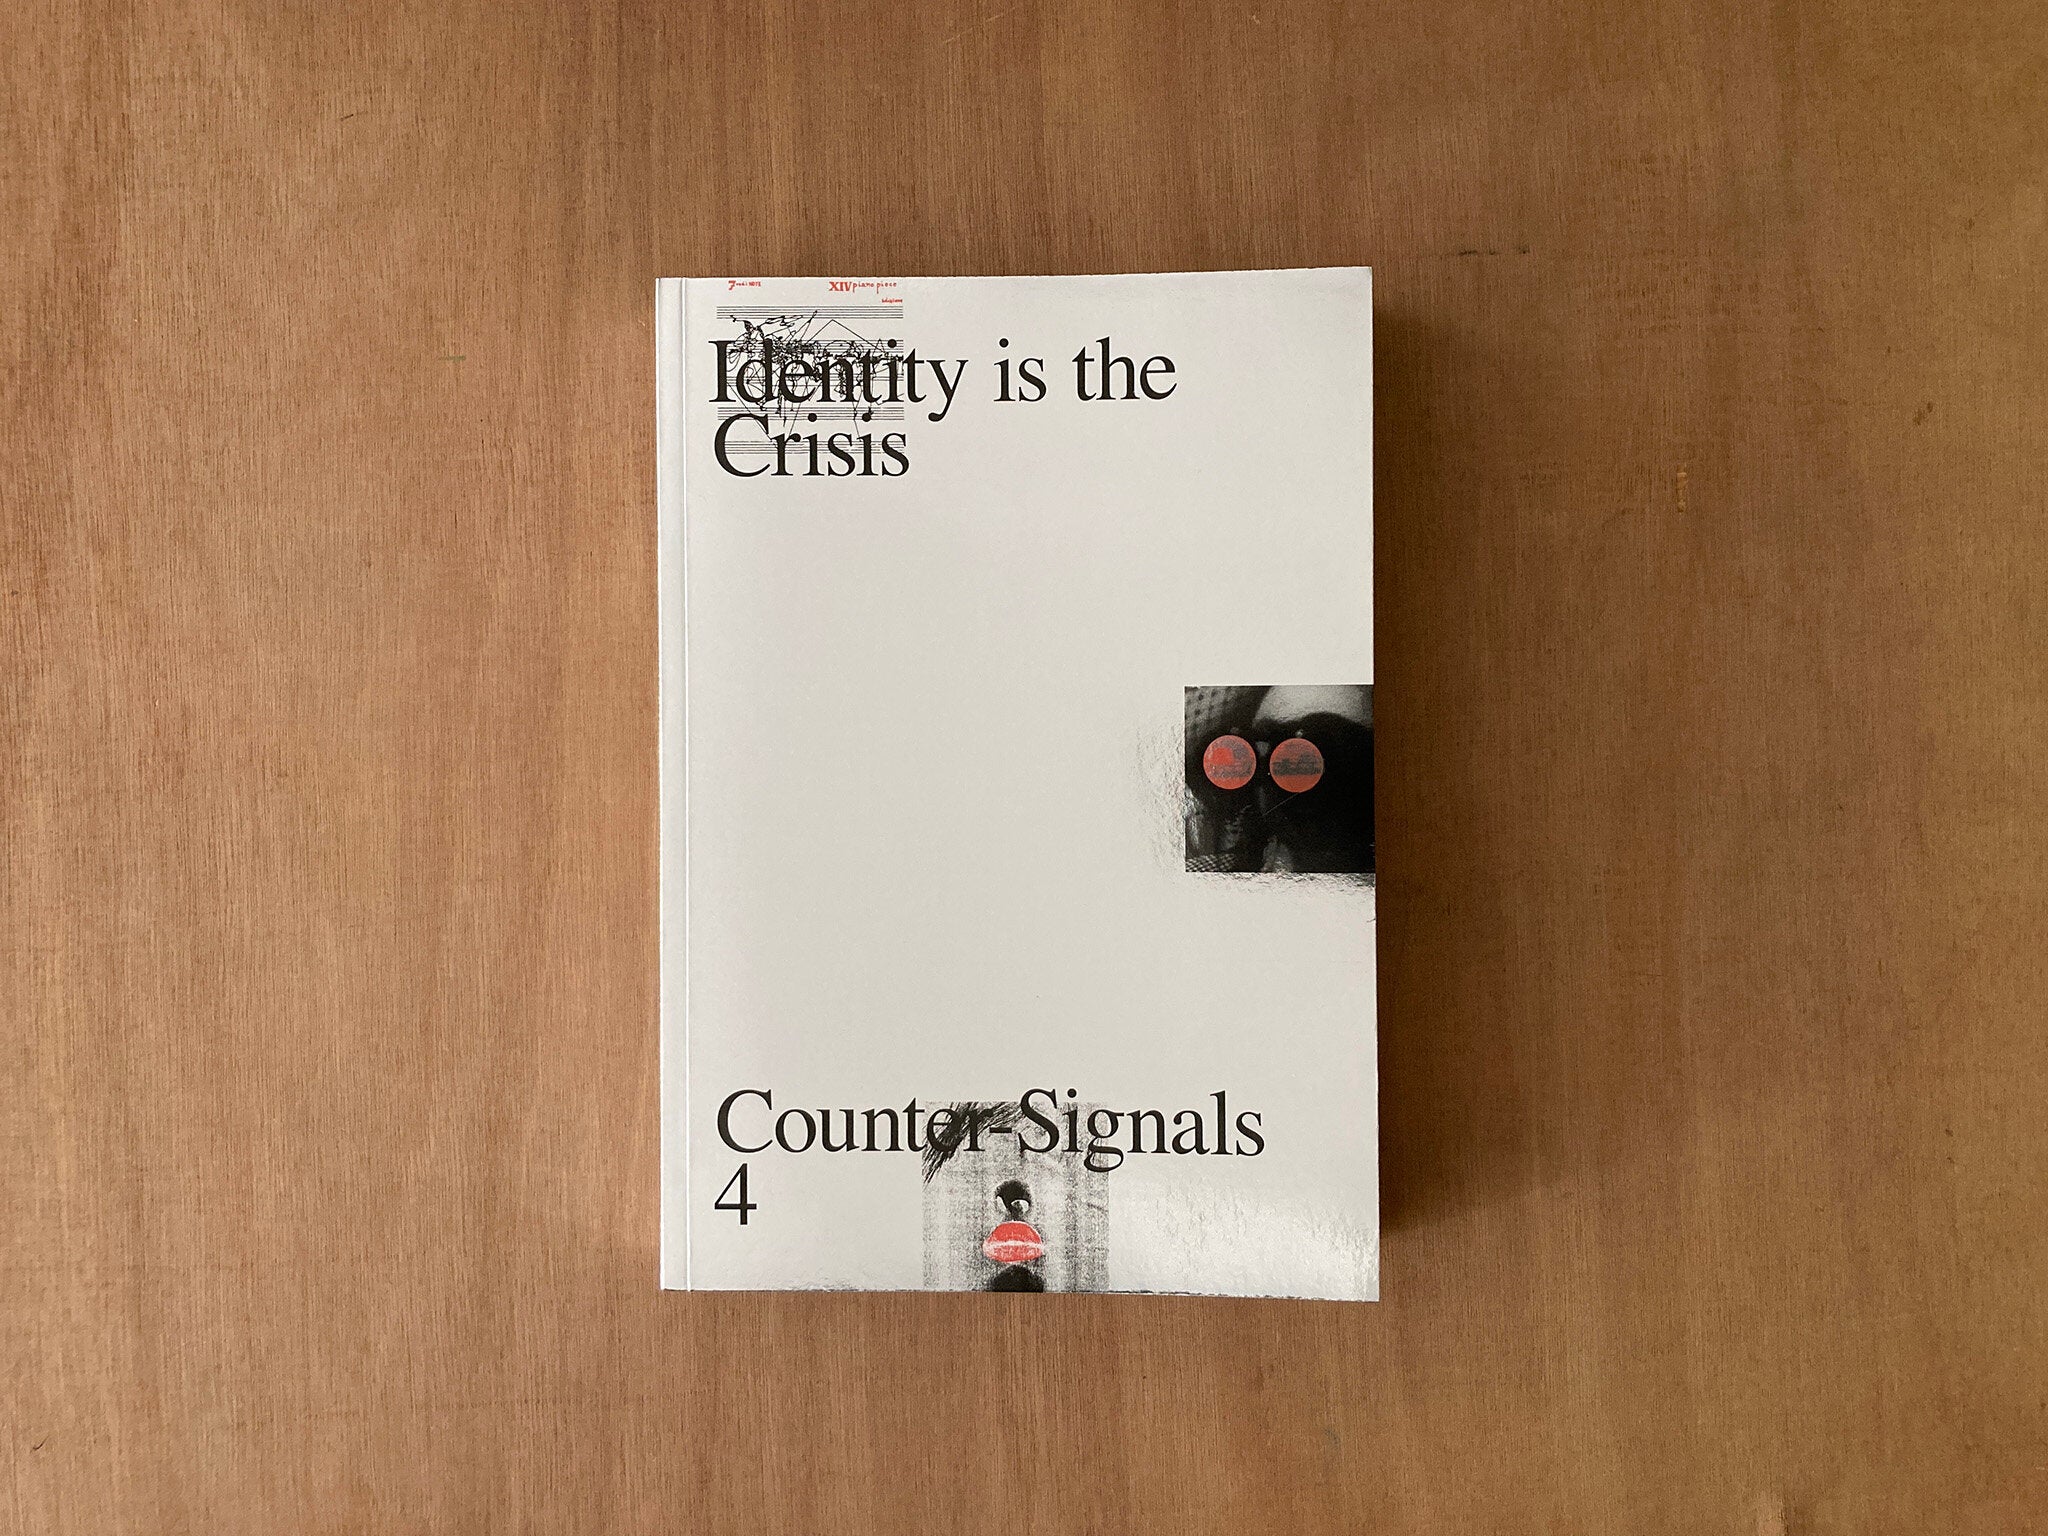 COUNTER-SIGNALS #4: IDENTITY IS THE CRISIS